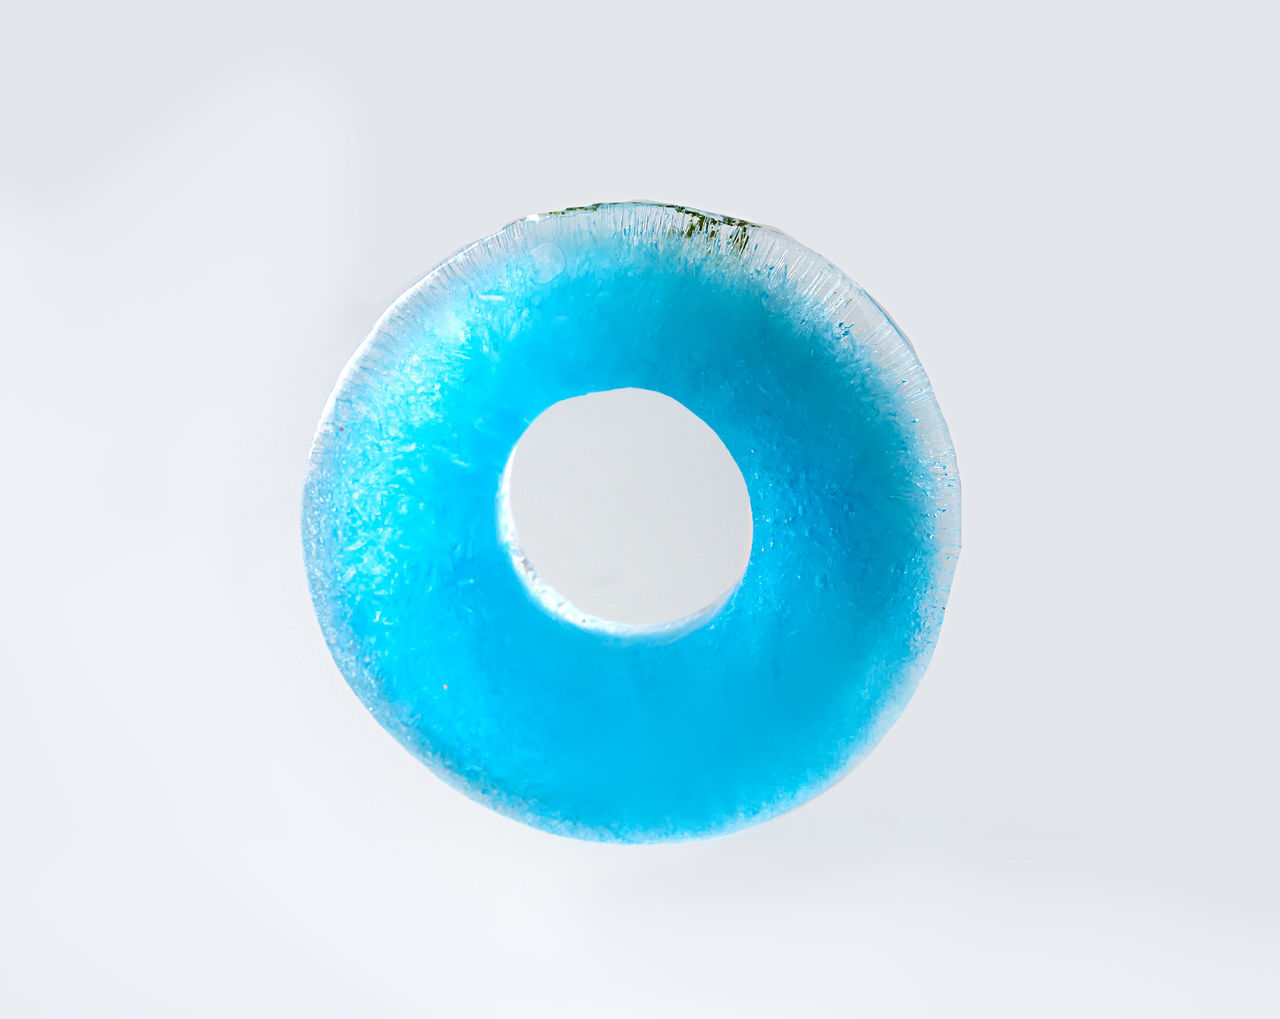 CLOSE-UP OF BLUE BALL AGAINST WHITE BACKGROUND